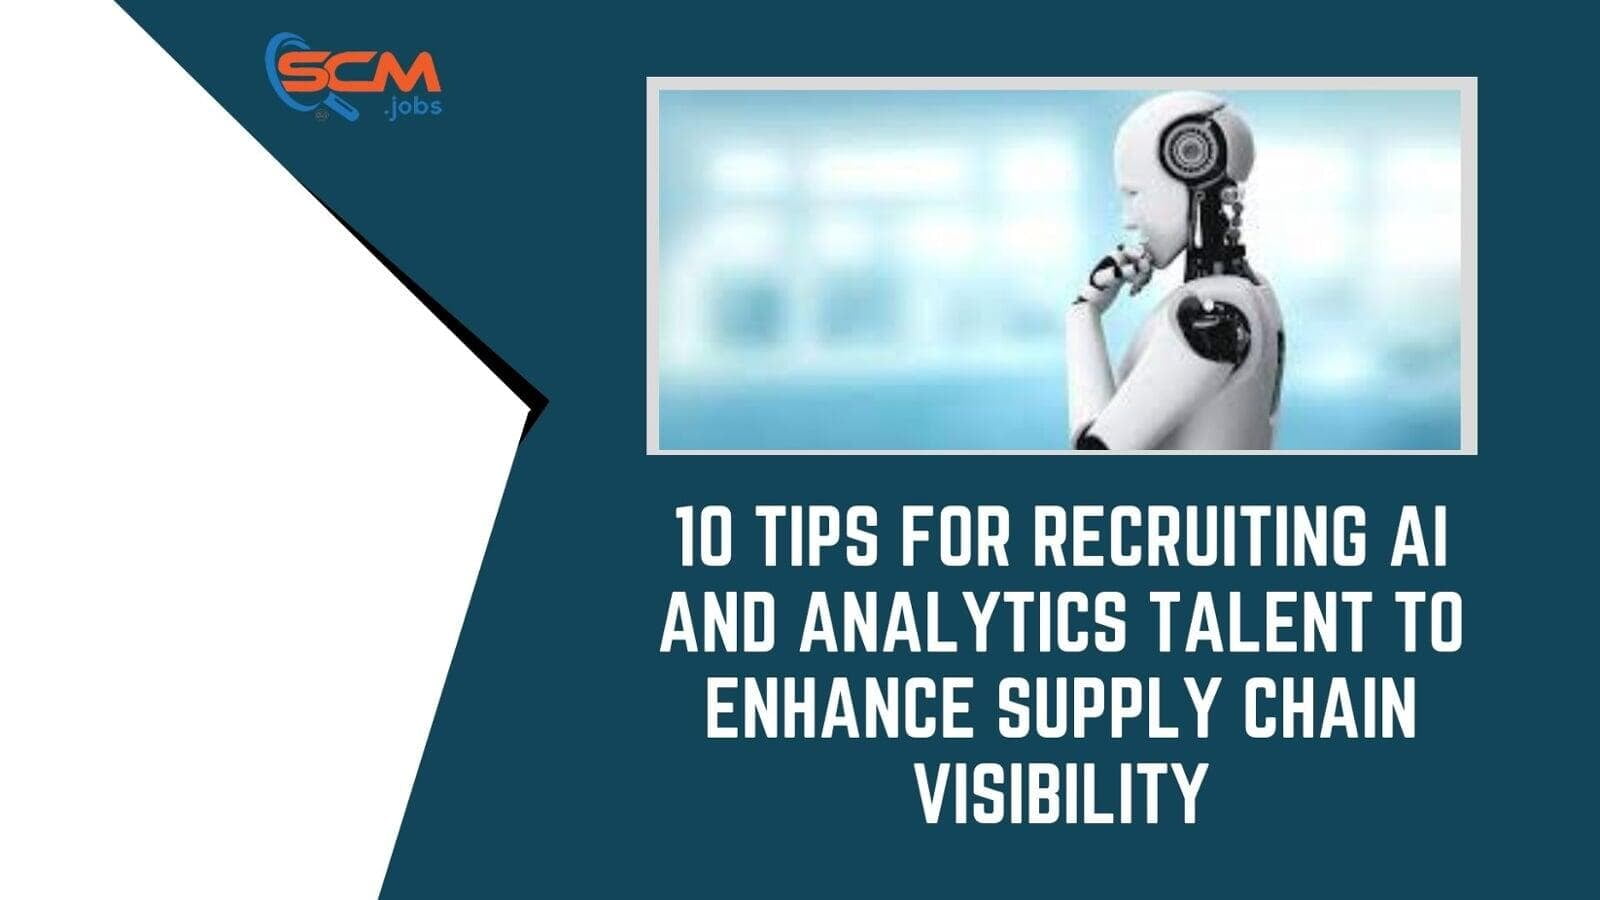 10 Tips for Recruiting AI and Analytics Talent to Enhance Supply Chain Visibility